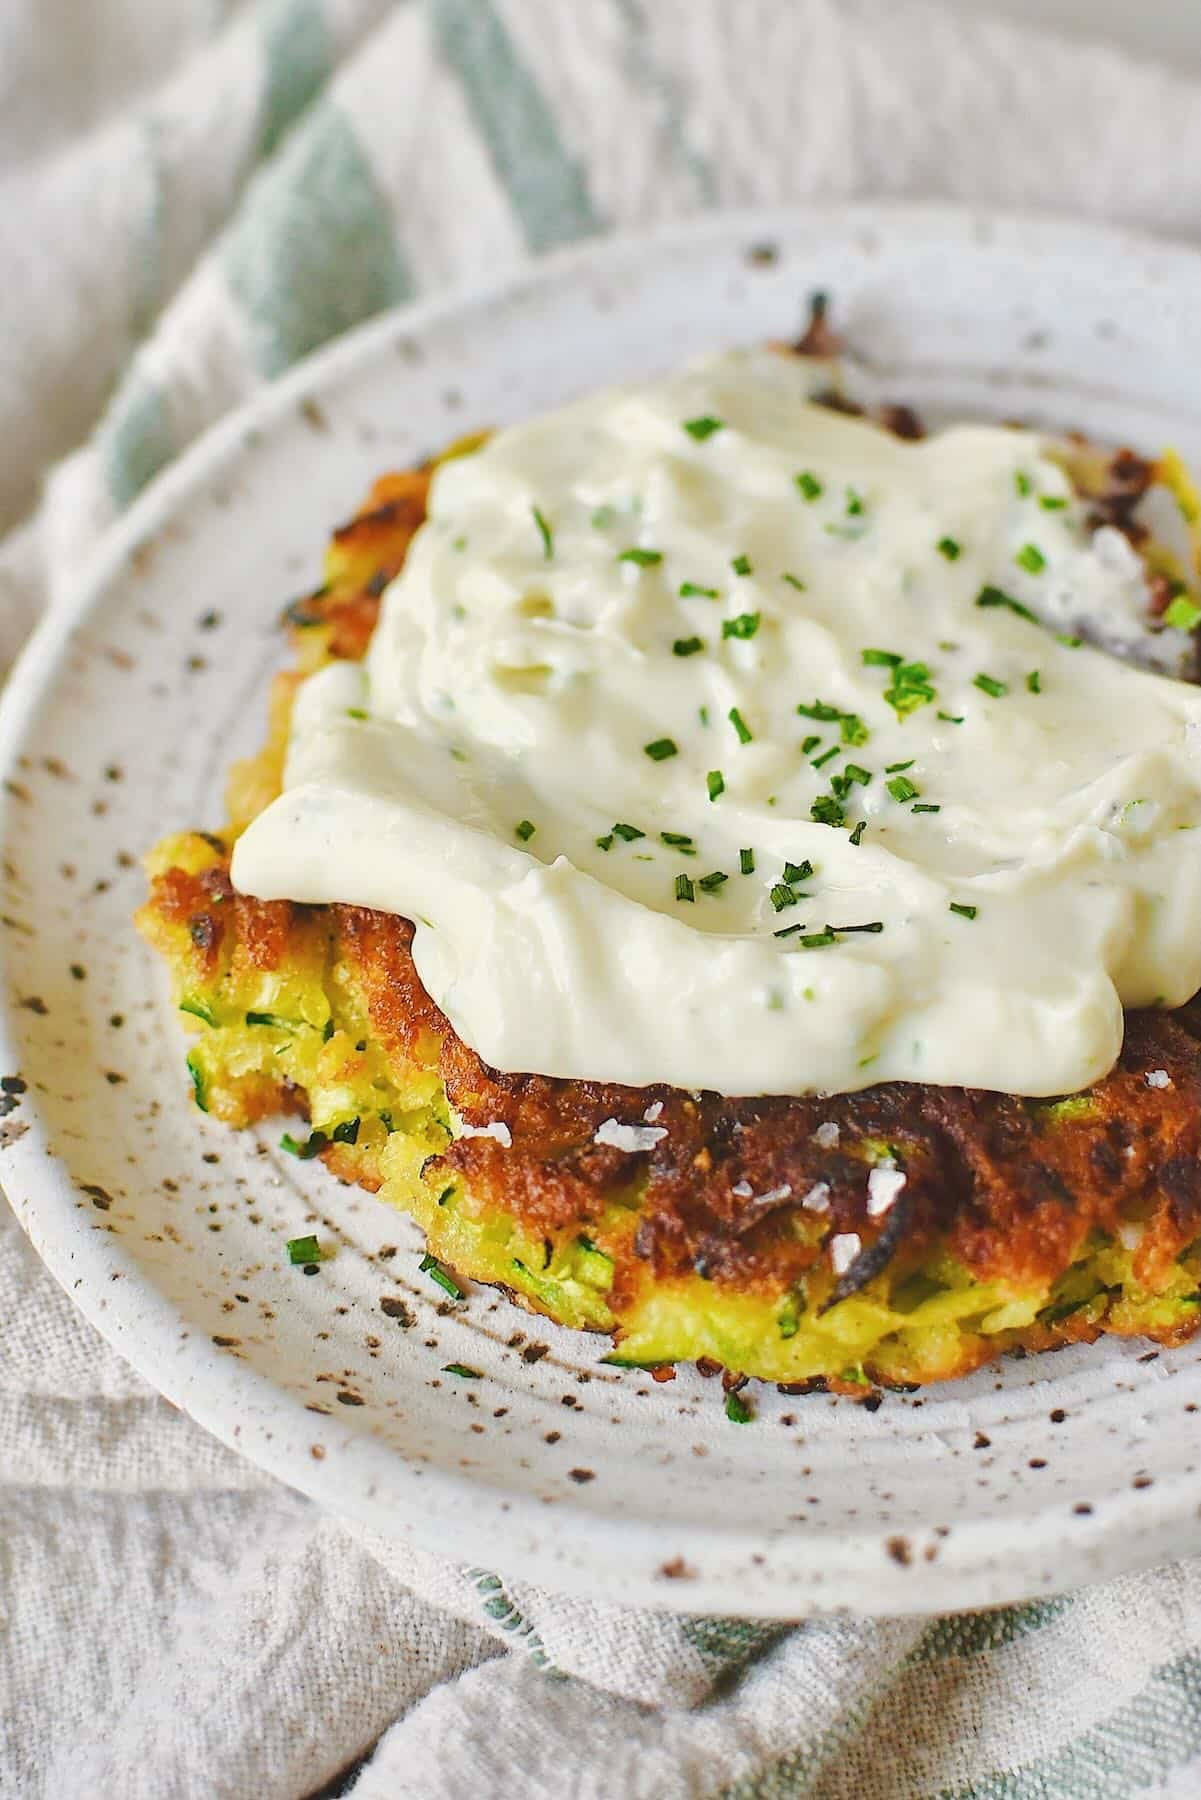 Zucchini Fritter topped with whipped goat cheese and ready to enjoy.